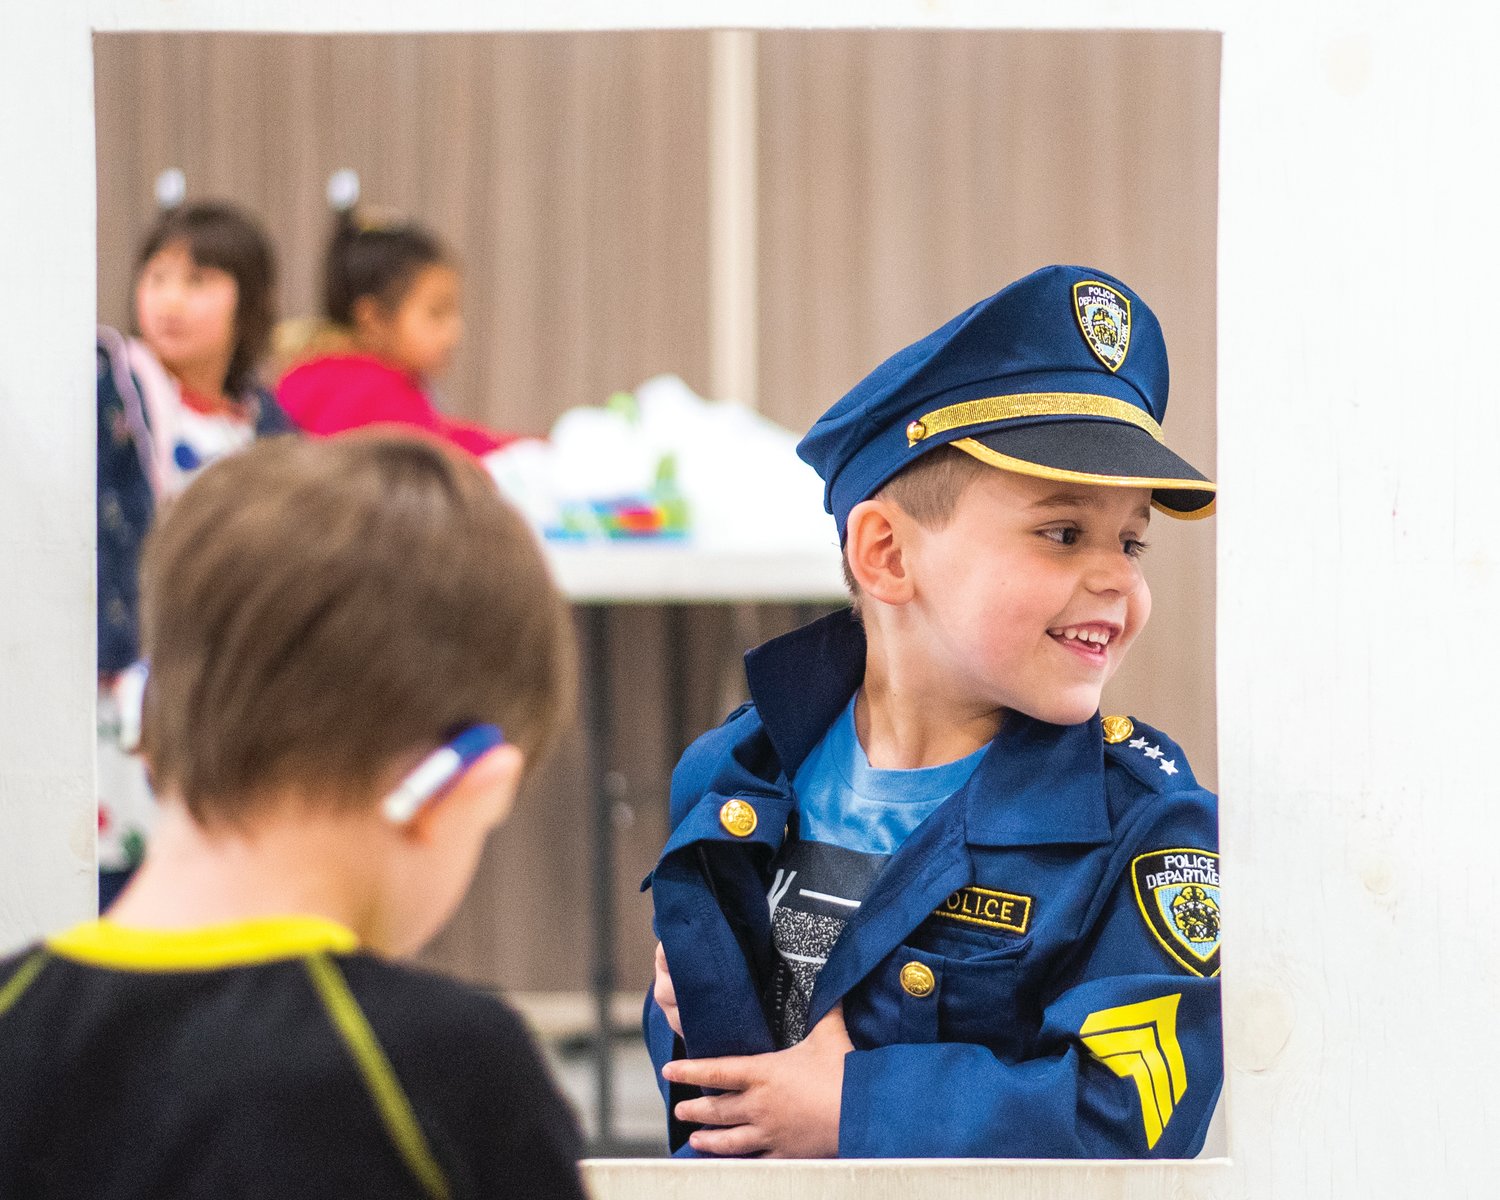 Chase Lovato smiles and sports a police uniform as fellow kindergarten students take on roles in Scooter Town Tuesday morning.